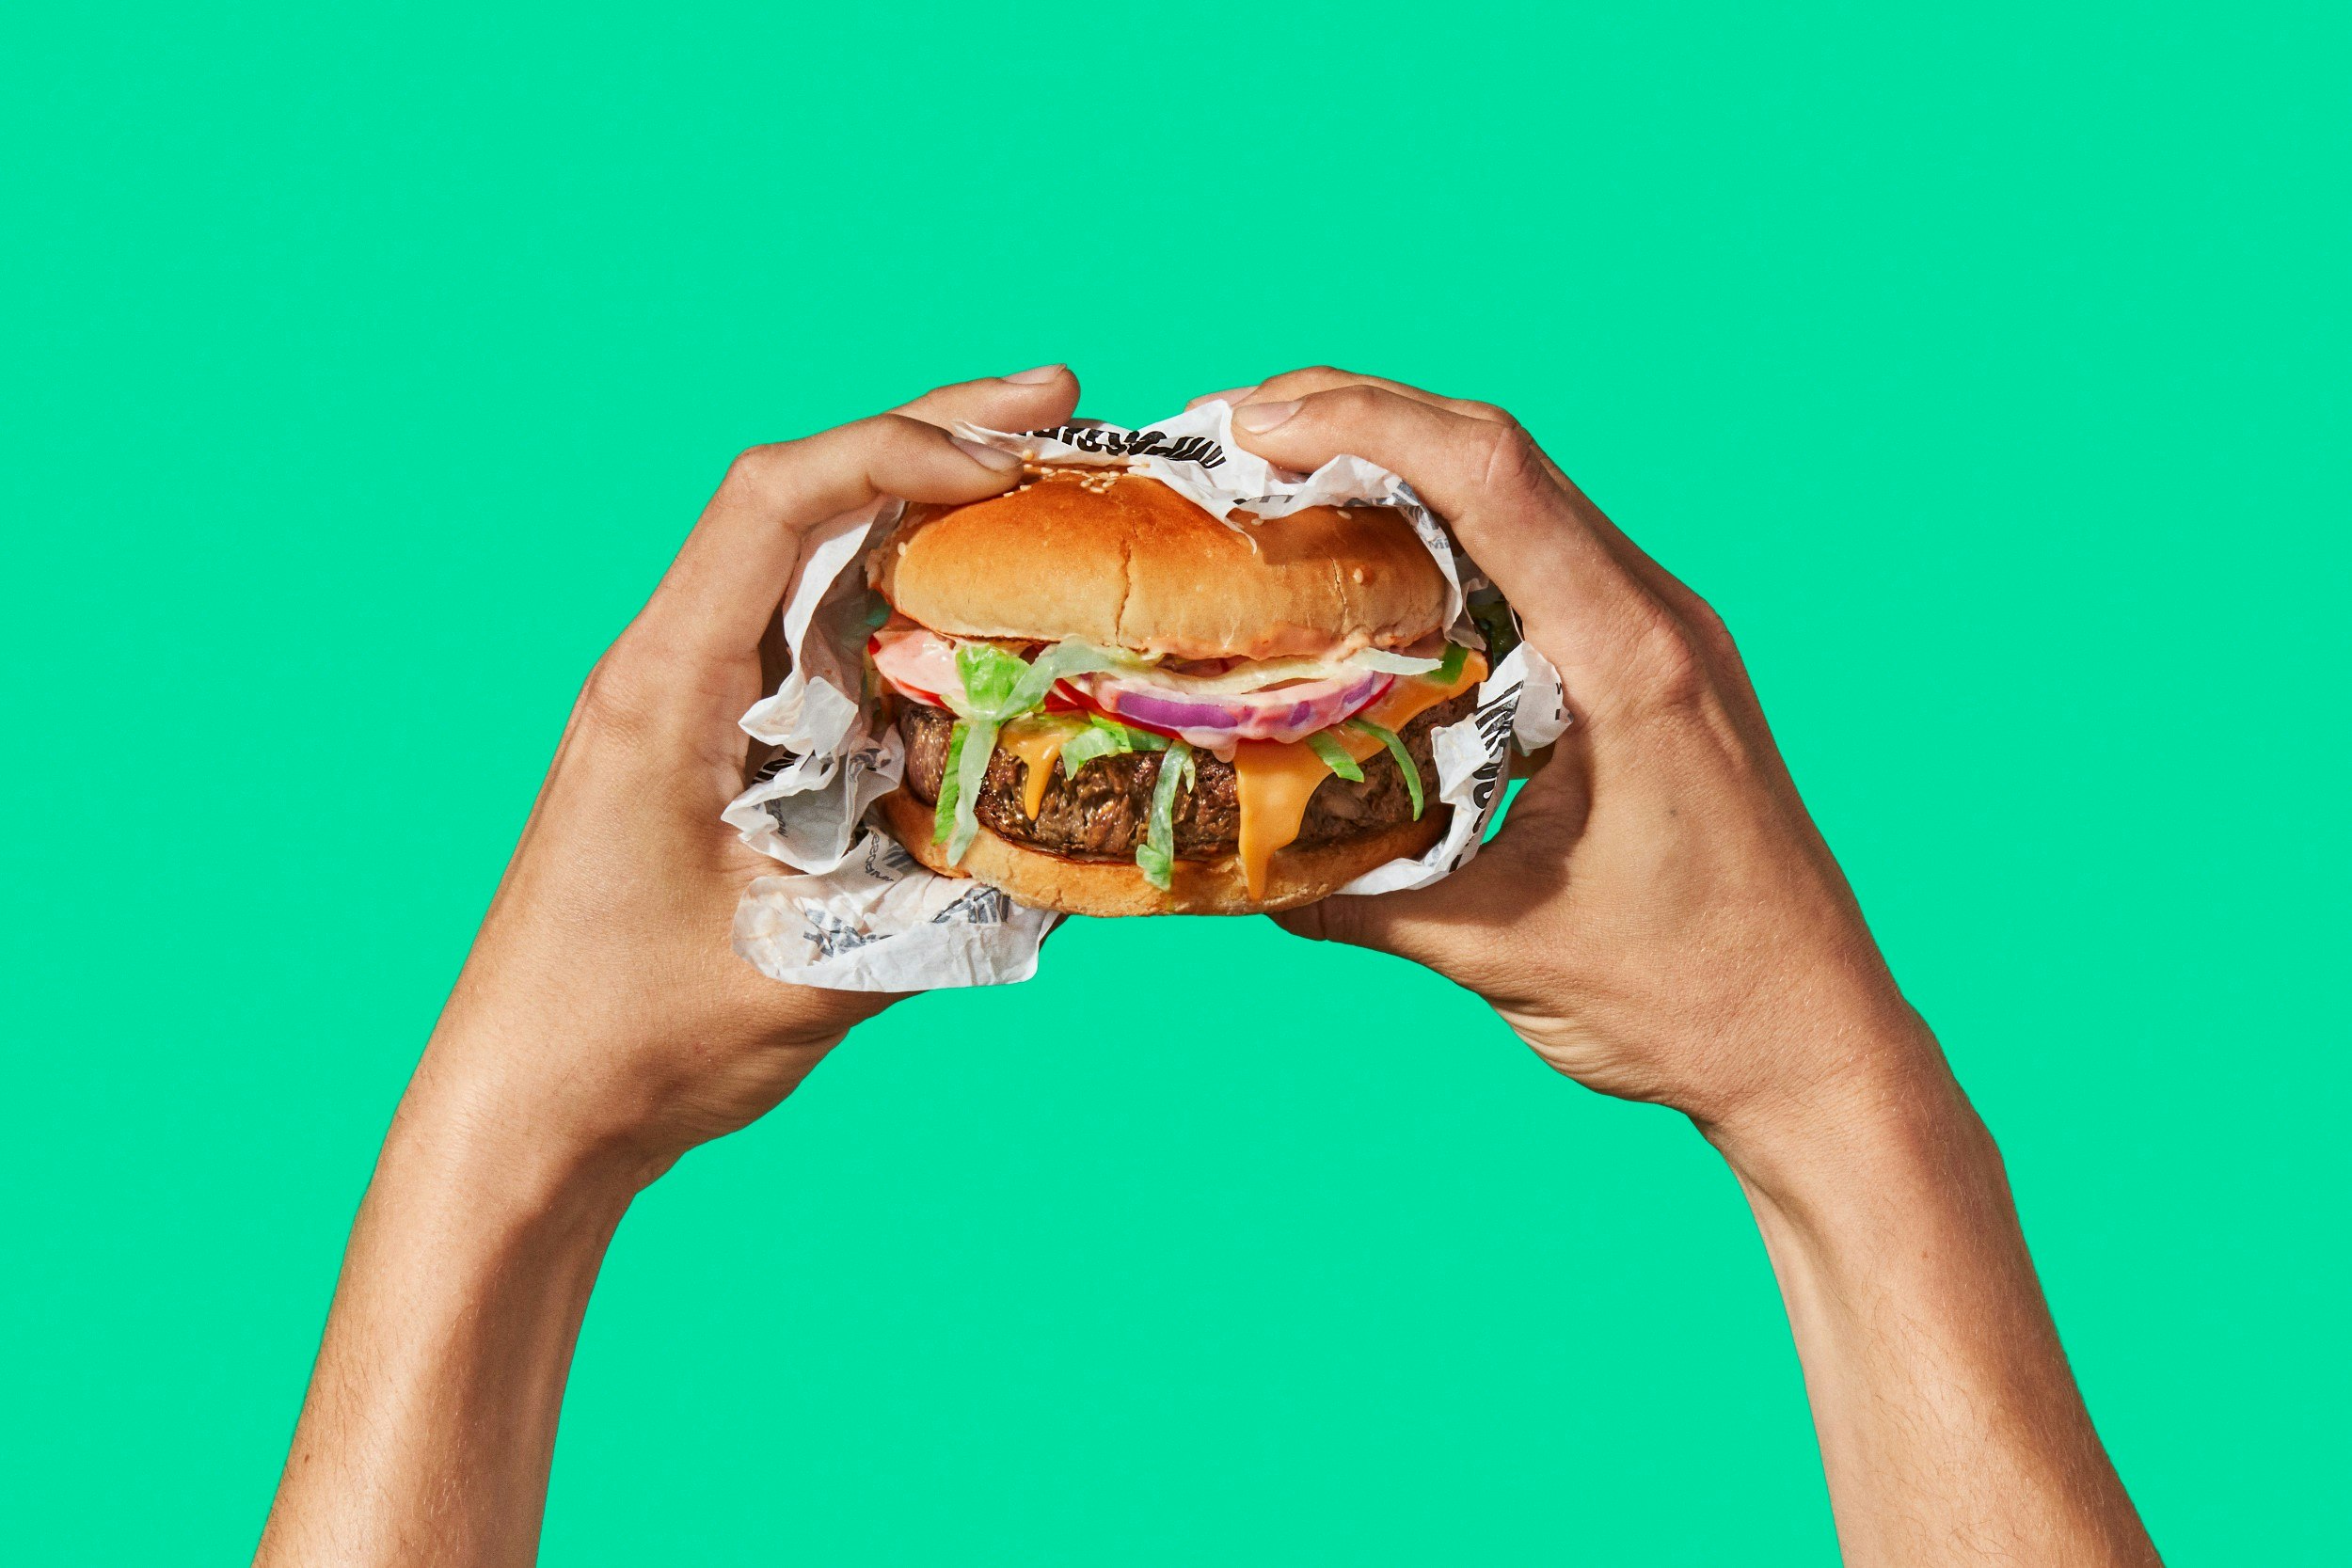 Two hands holding a burger on a green background